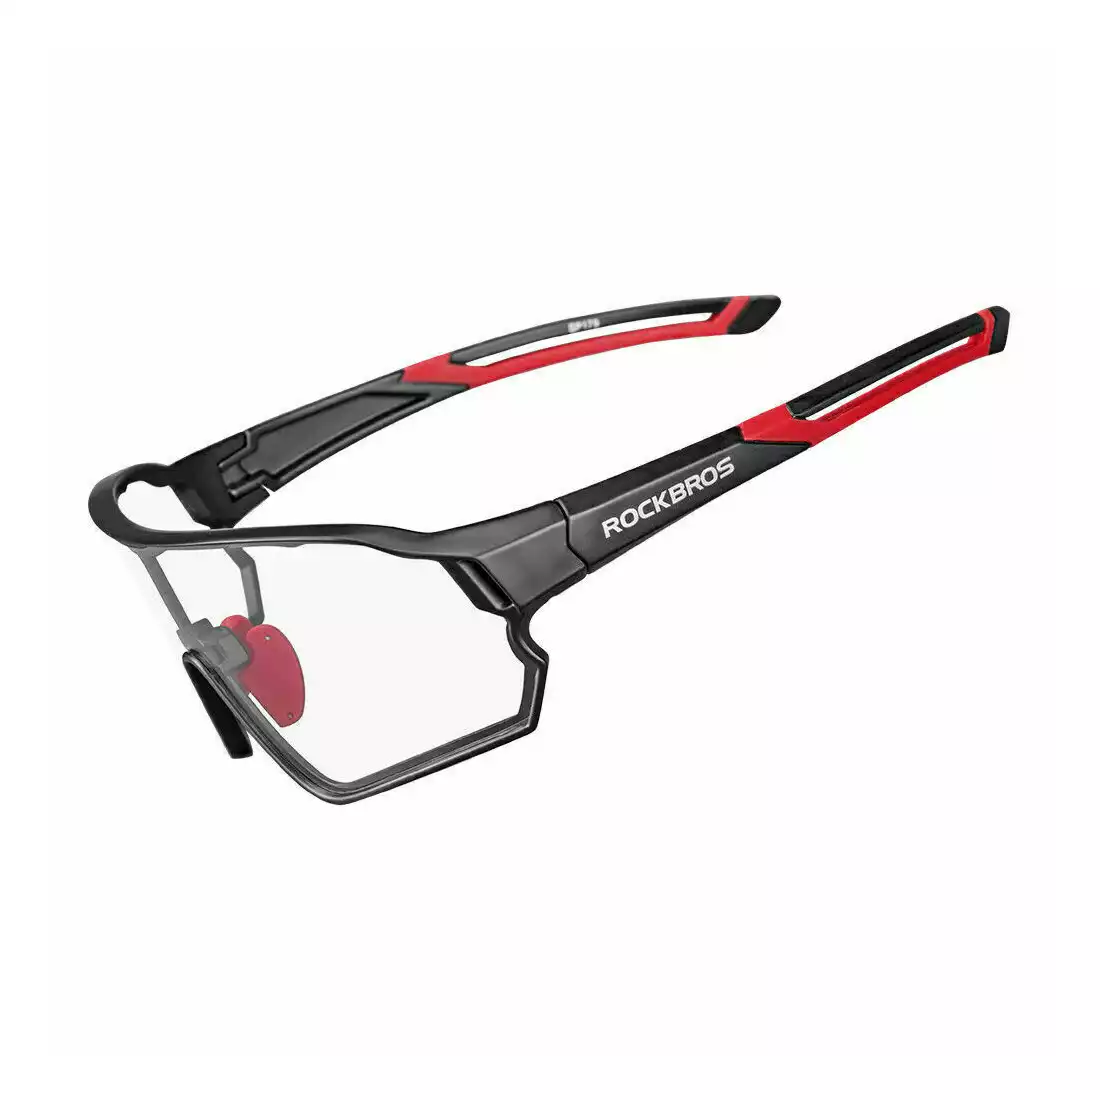 ROCKBROS Polarized Bicycle Full Frame Cycling Sport Glasses Black Red Goggles 